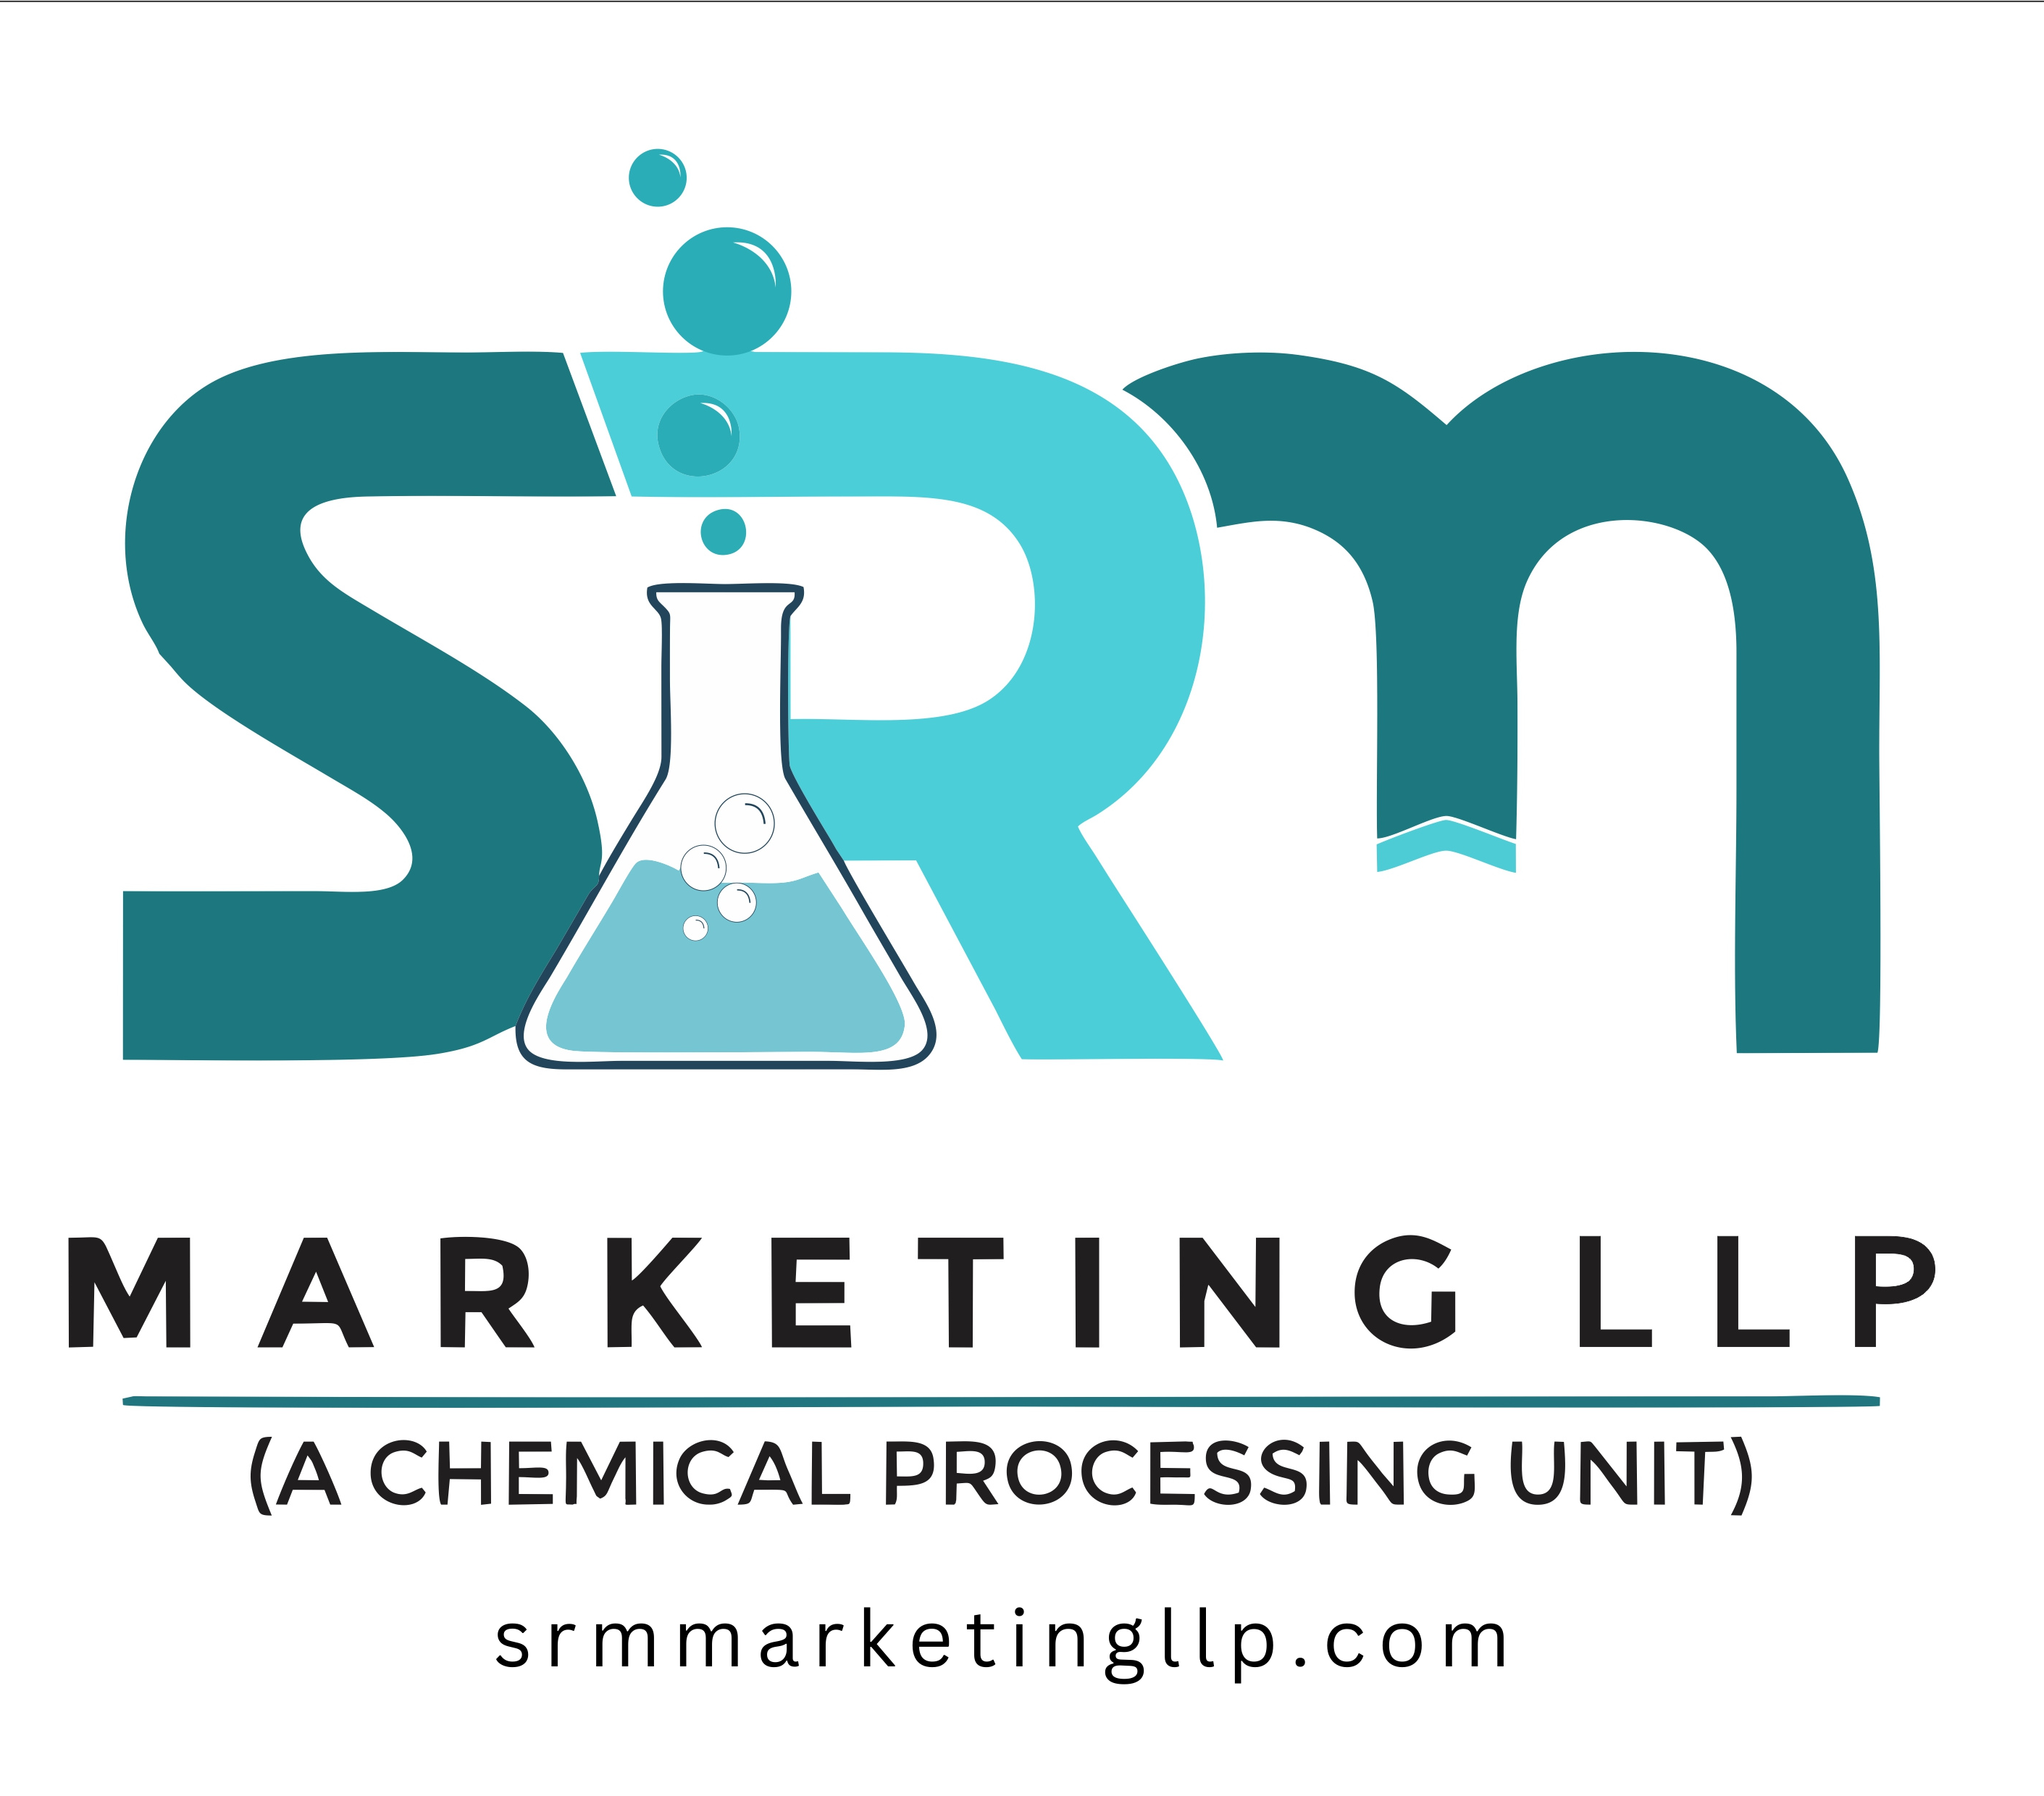 SRM Marketing LLP Logo | Trusted Chemical processing unit | Adhesives and Resins manufacturer srmmarketingllp.com